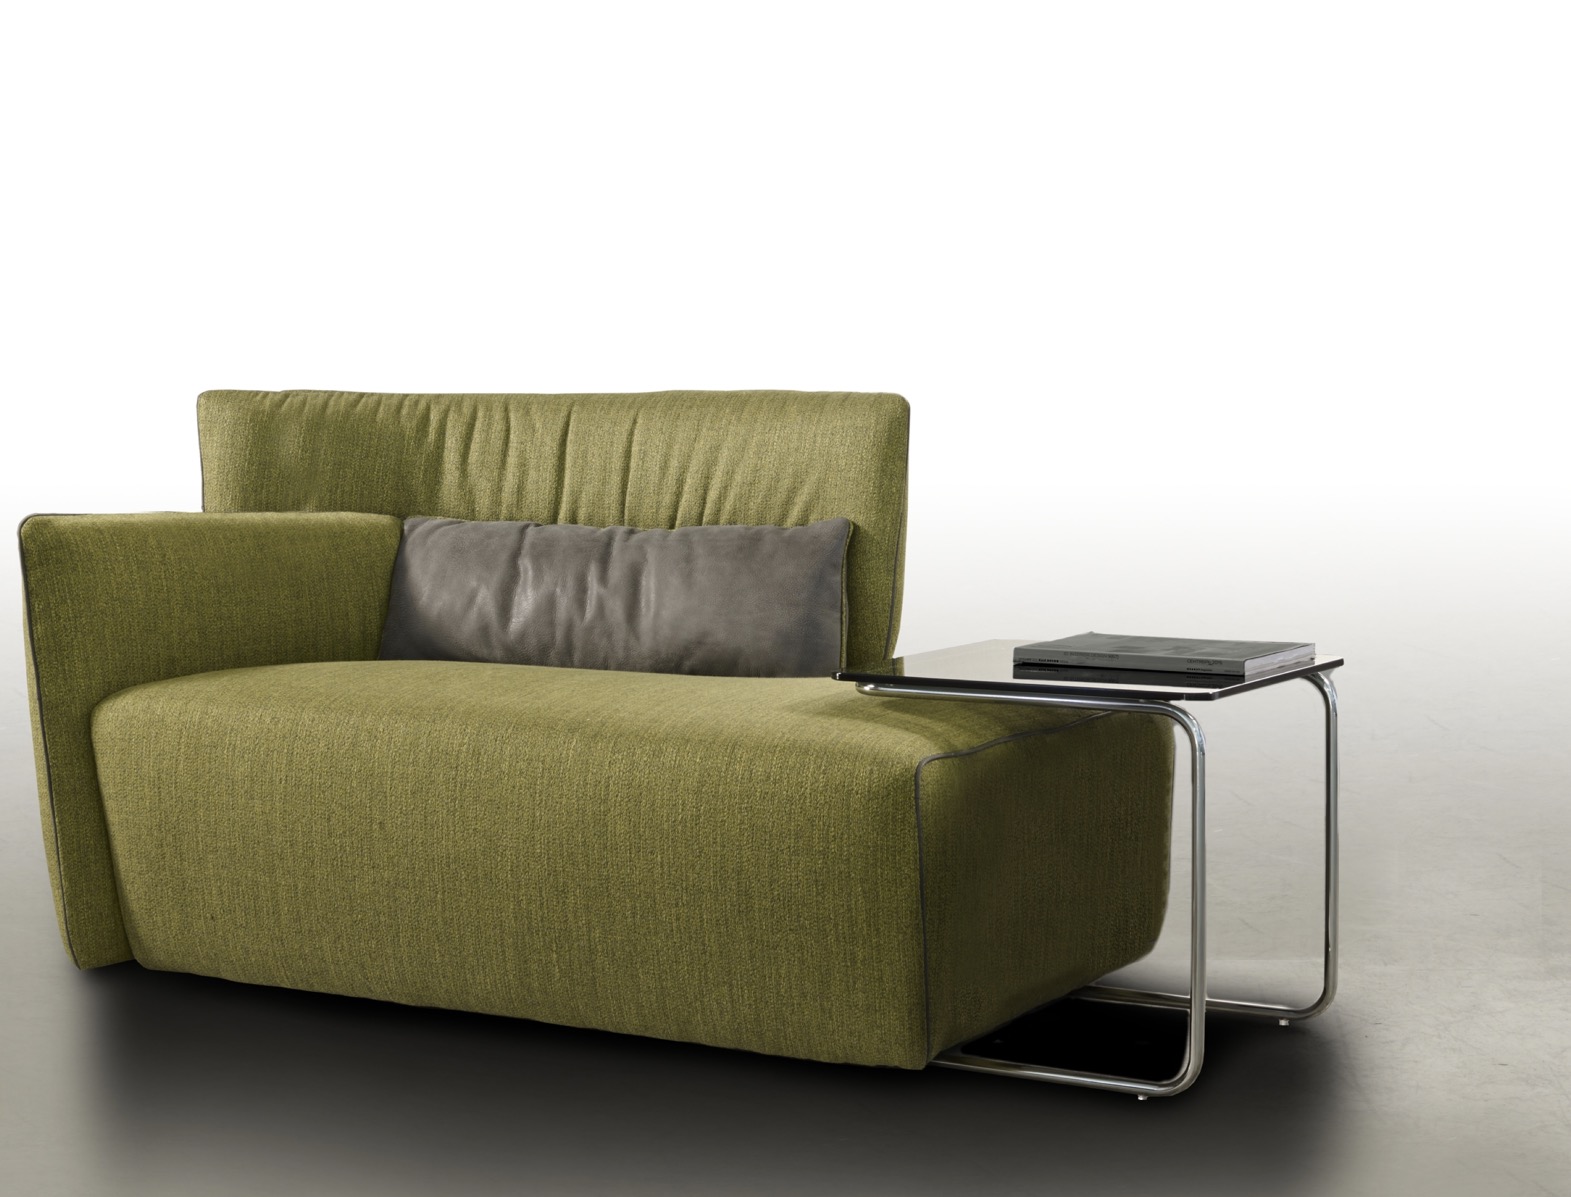 Tulip Chaise Lounge